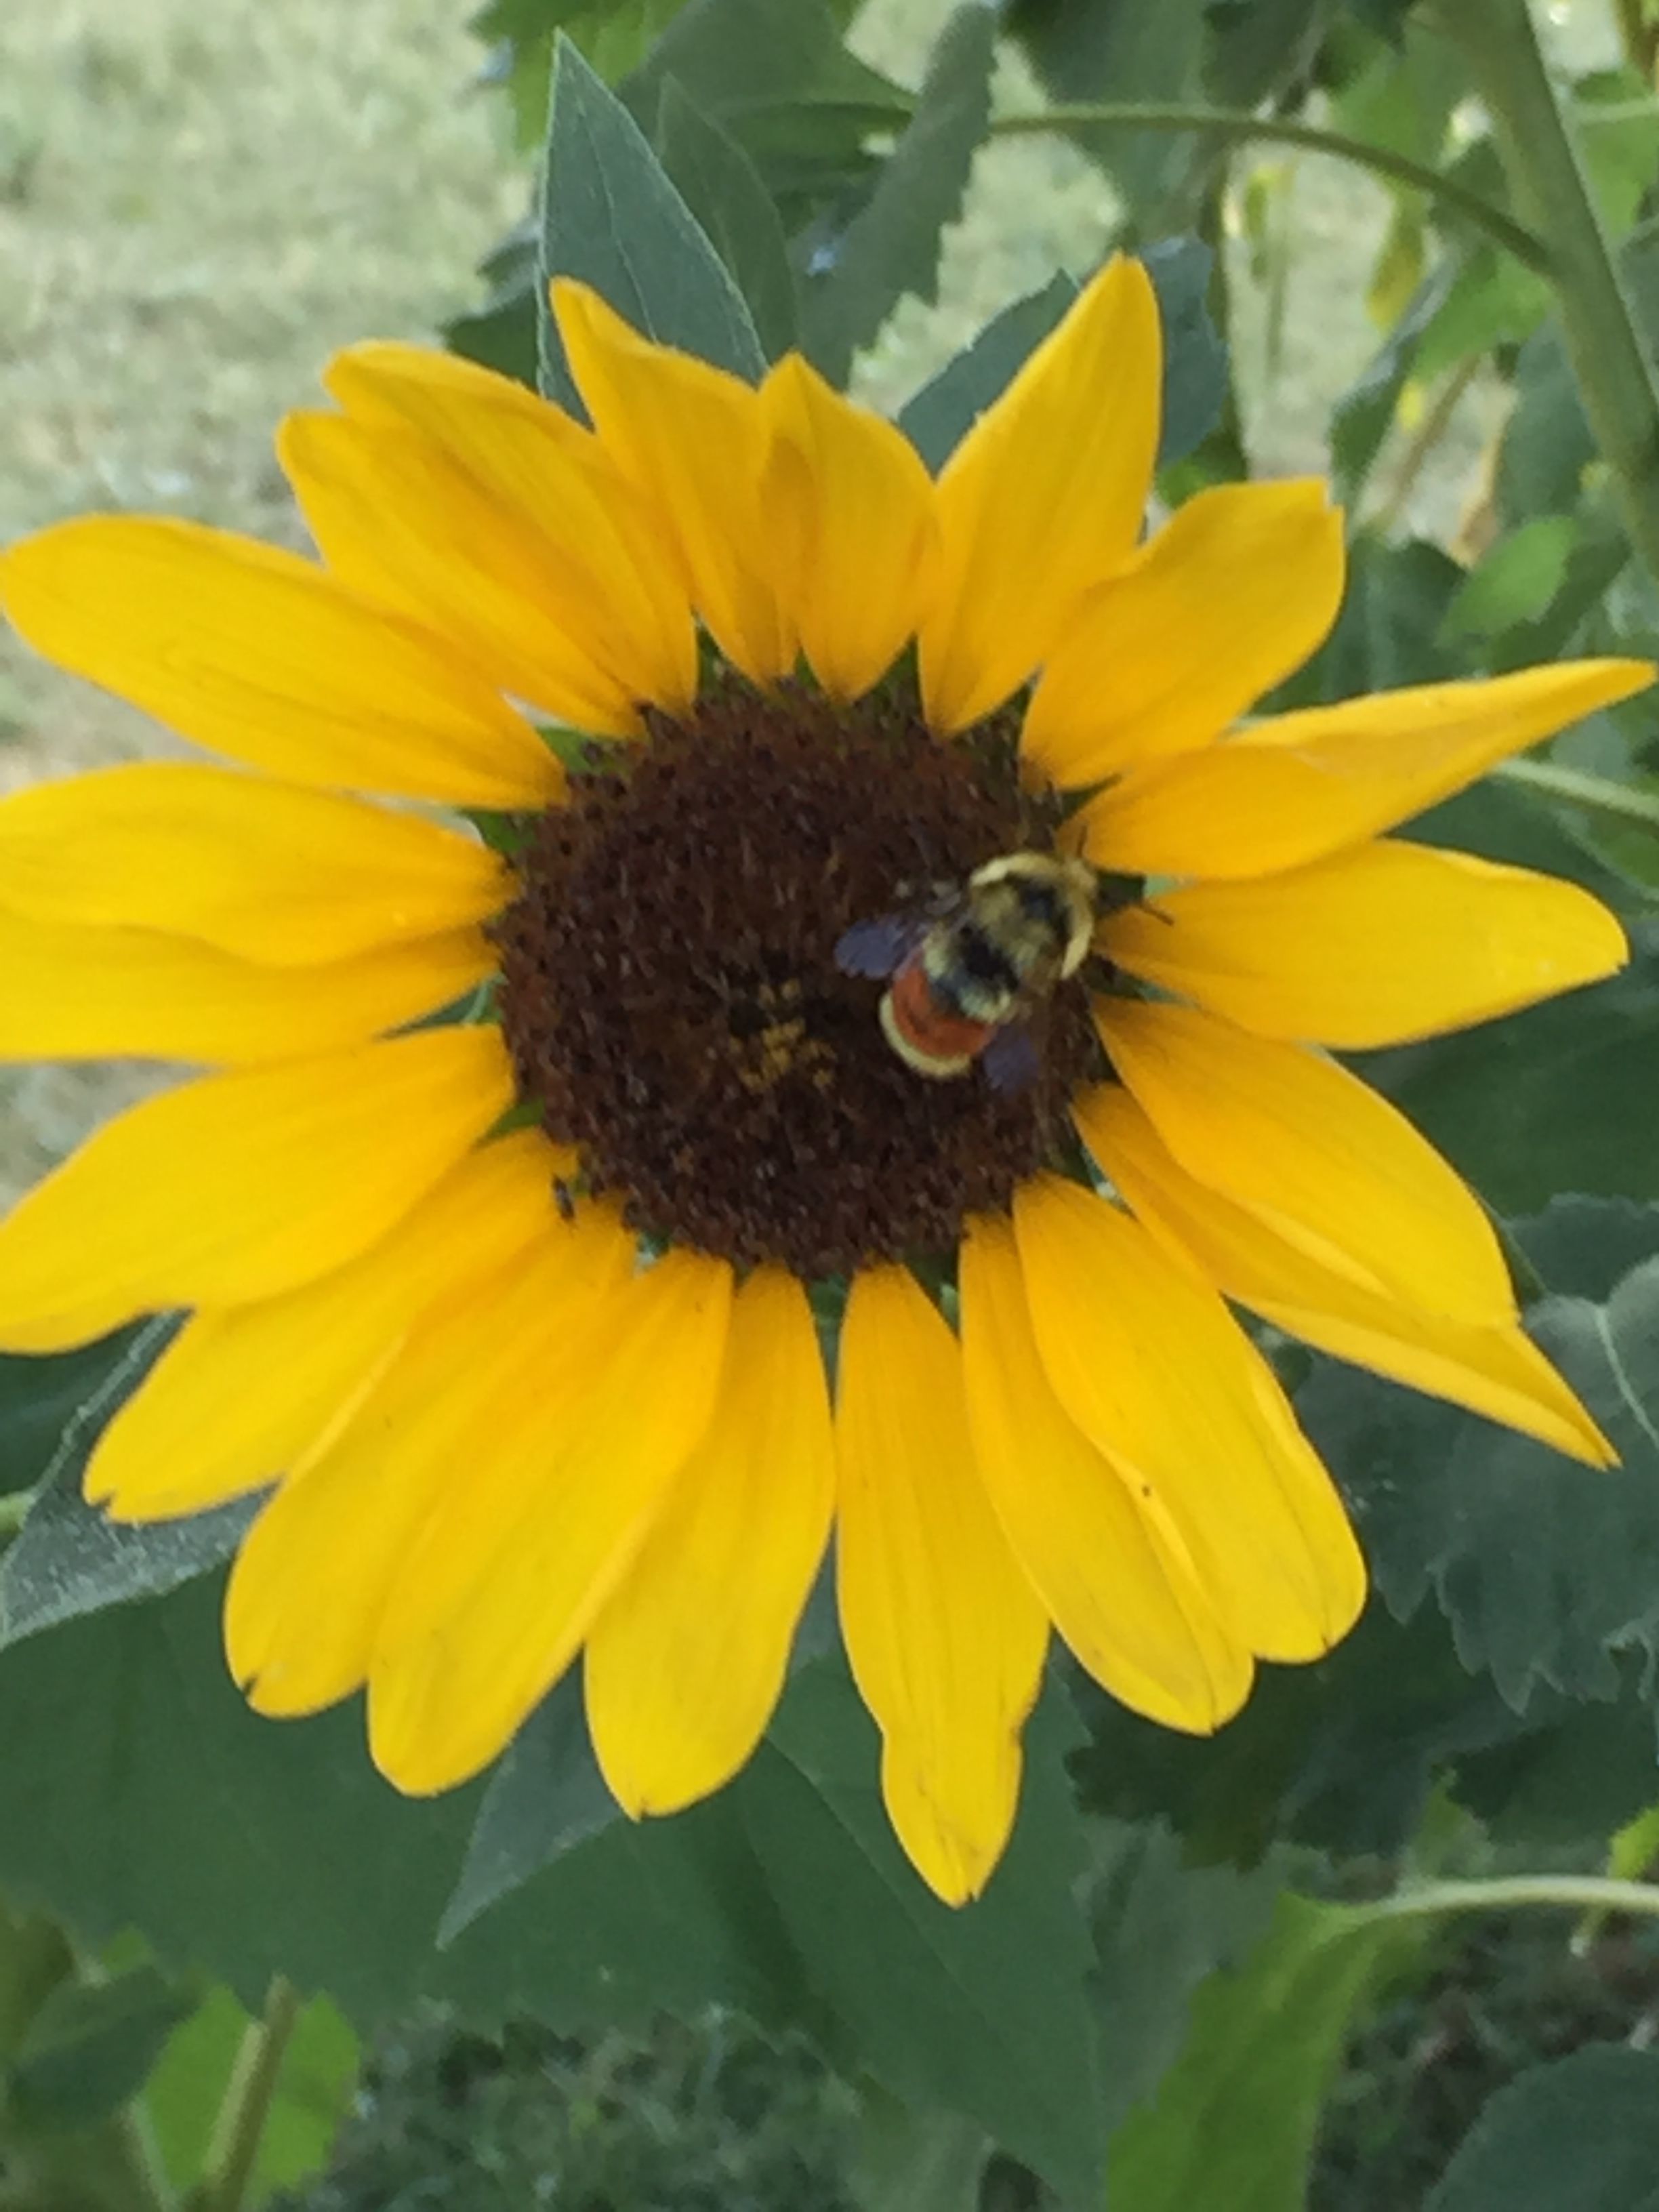 image.jpeg Sunflower with Rusty patch bumblebee